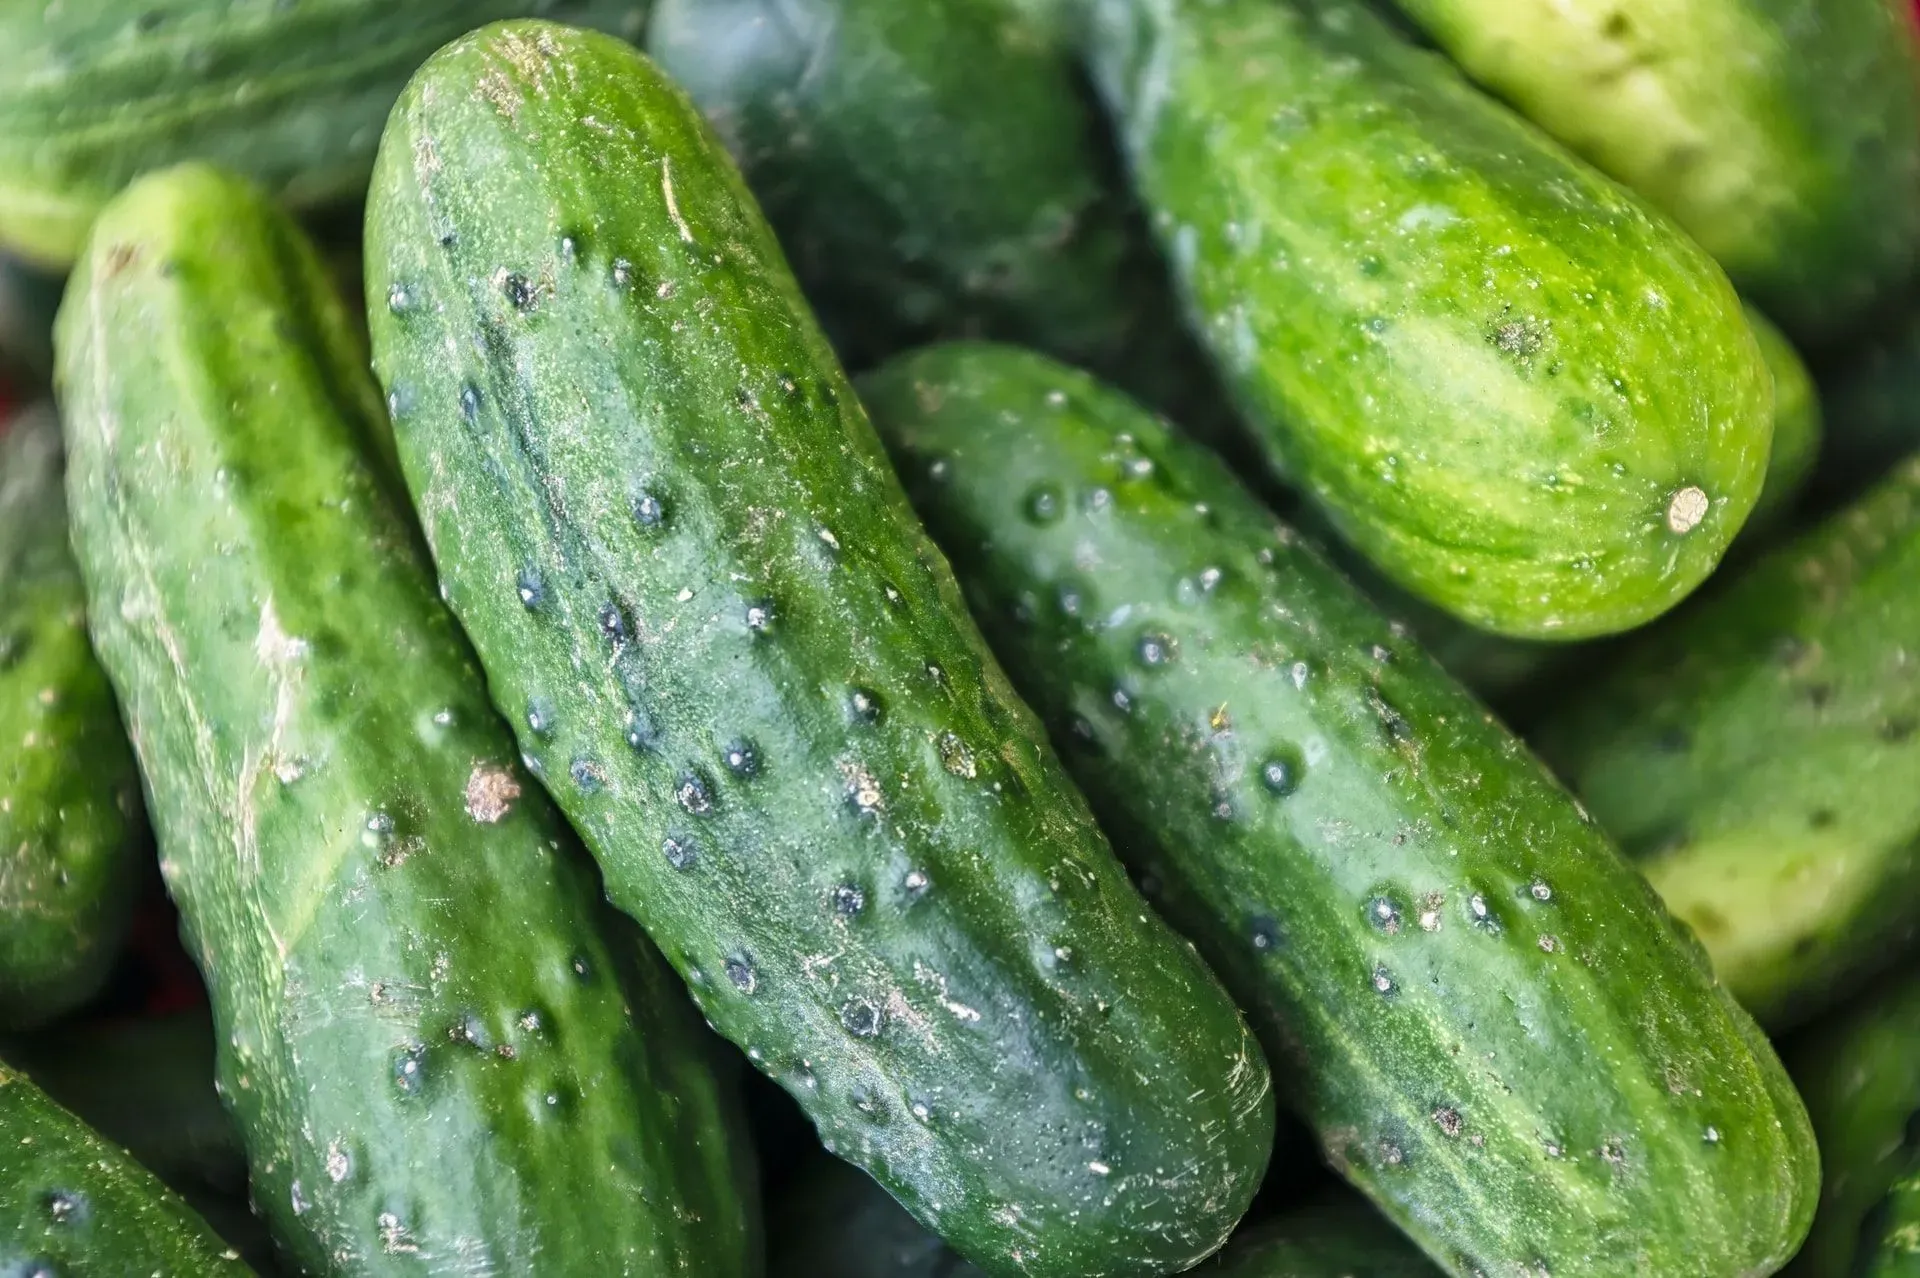 Are cucumbers fruit or just another vegetable?